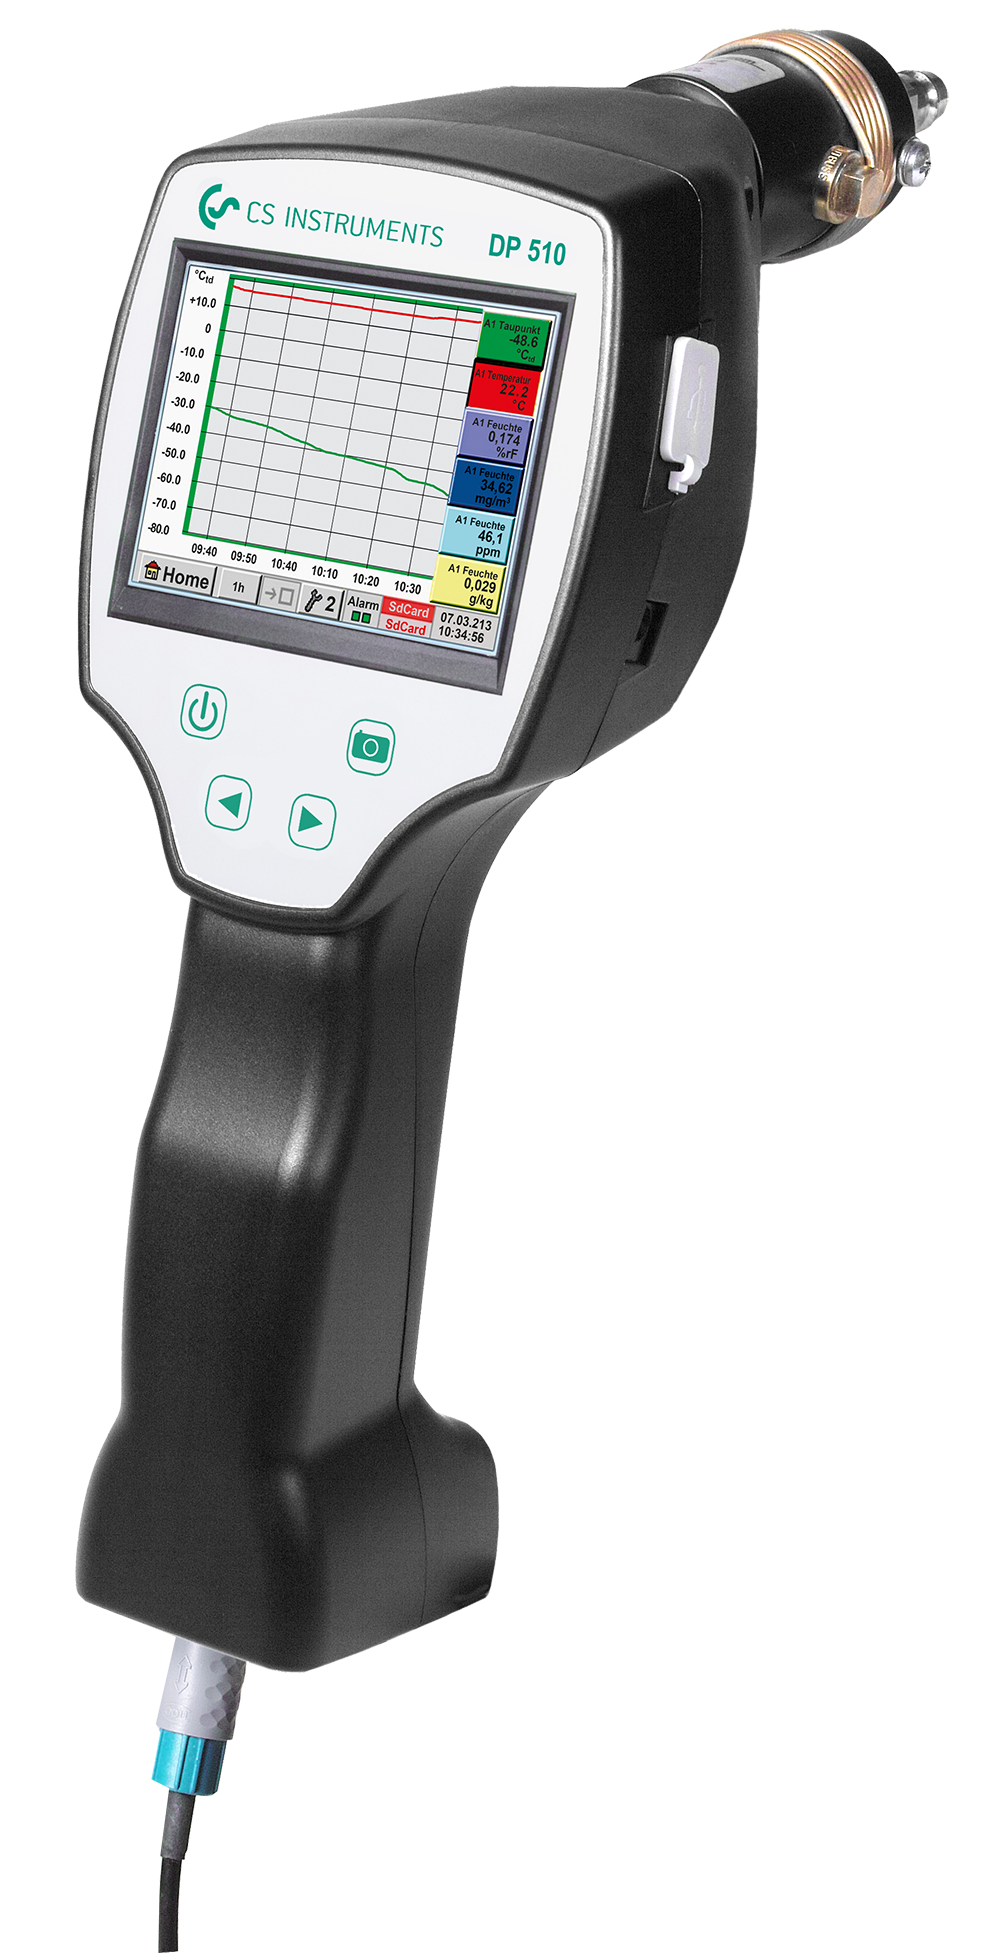 Portable dew point meter DP 510 with third party sensor